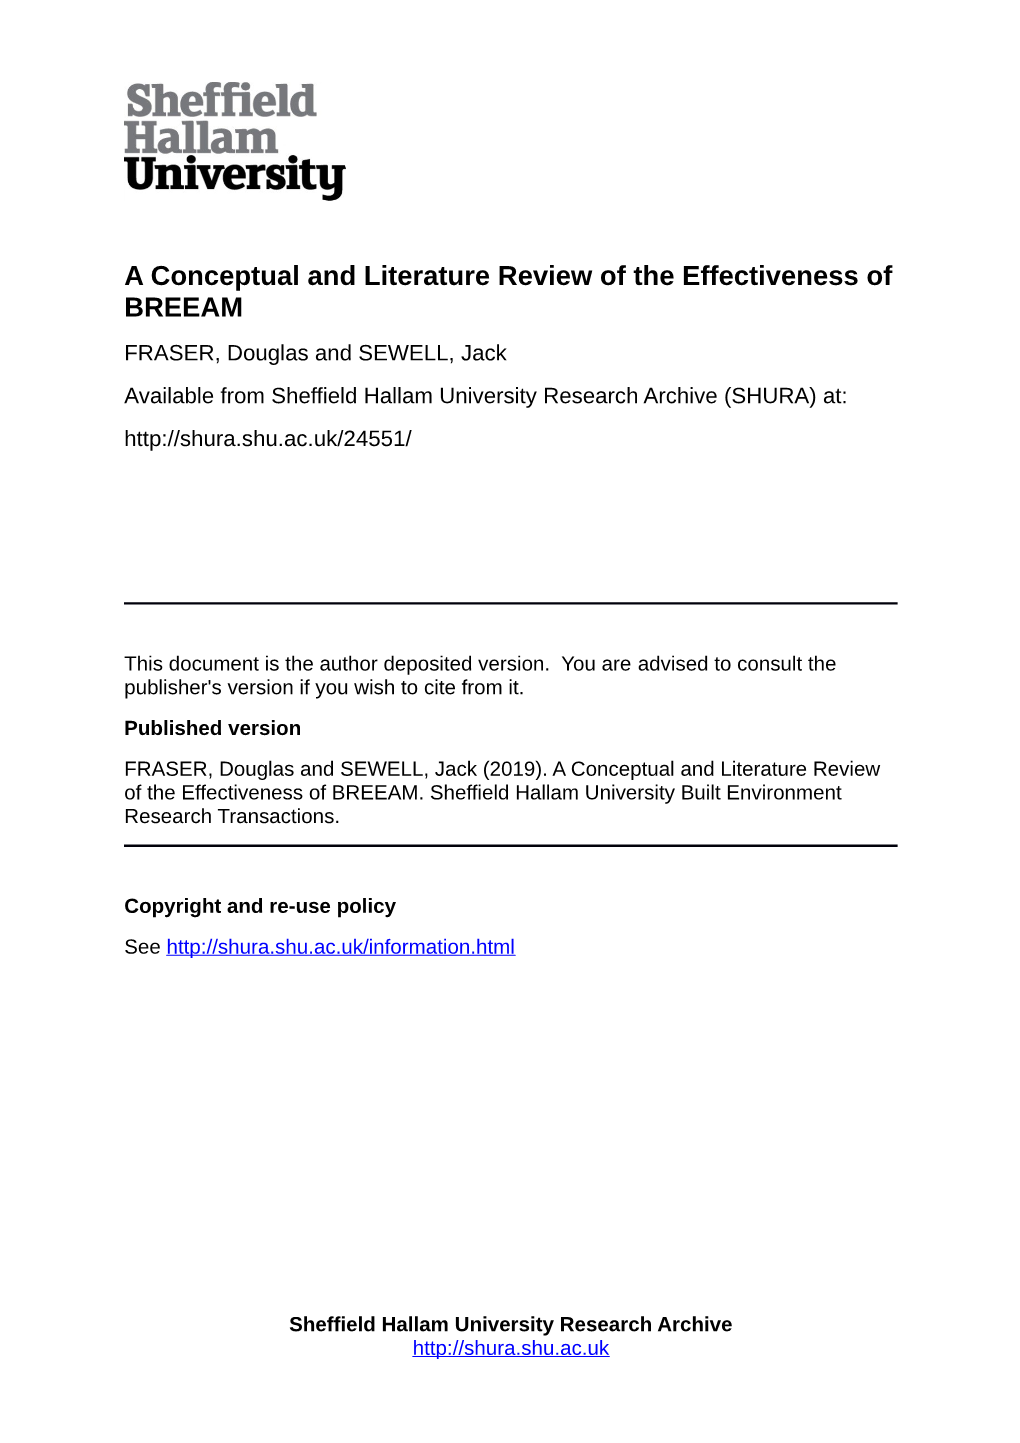 A Conceptual and Literature Review of the Effectiveness of BREEAM